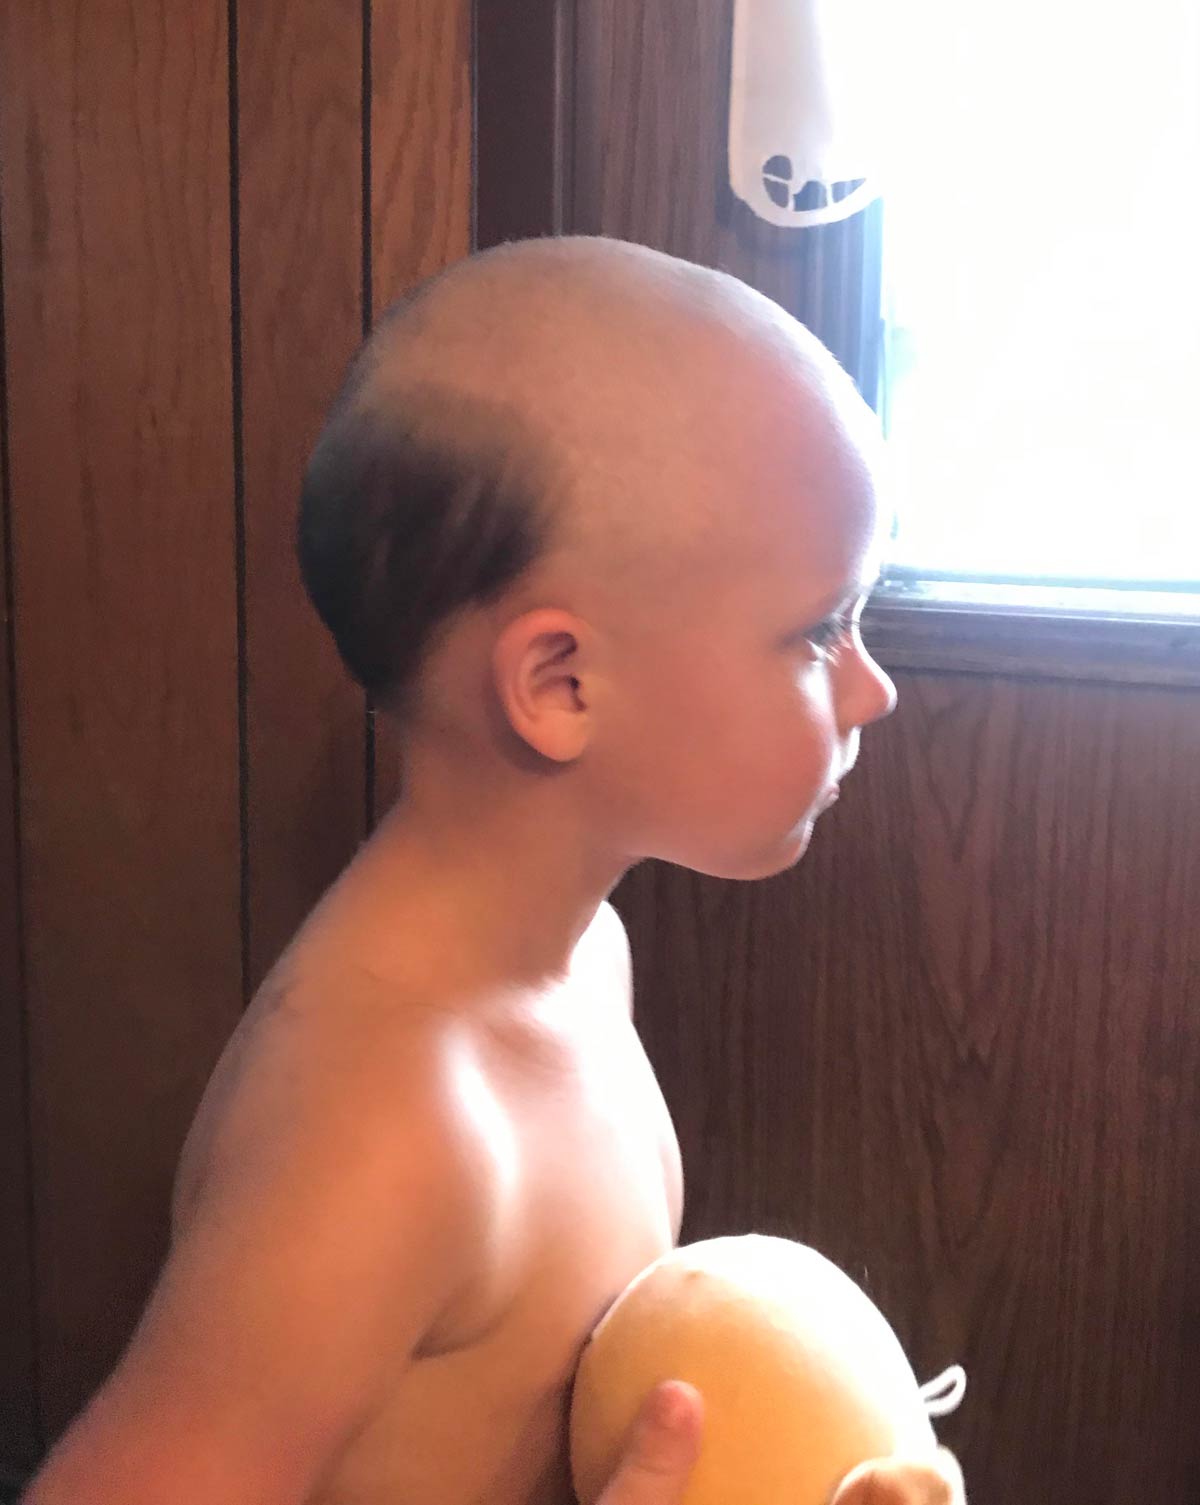 He tried to cut his own hair... So I fixed it for him